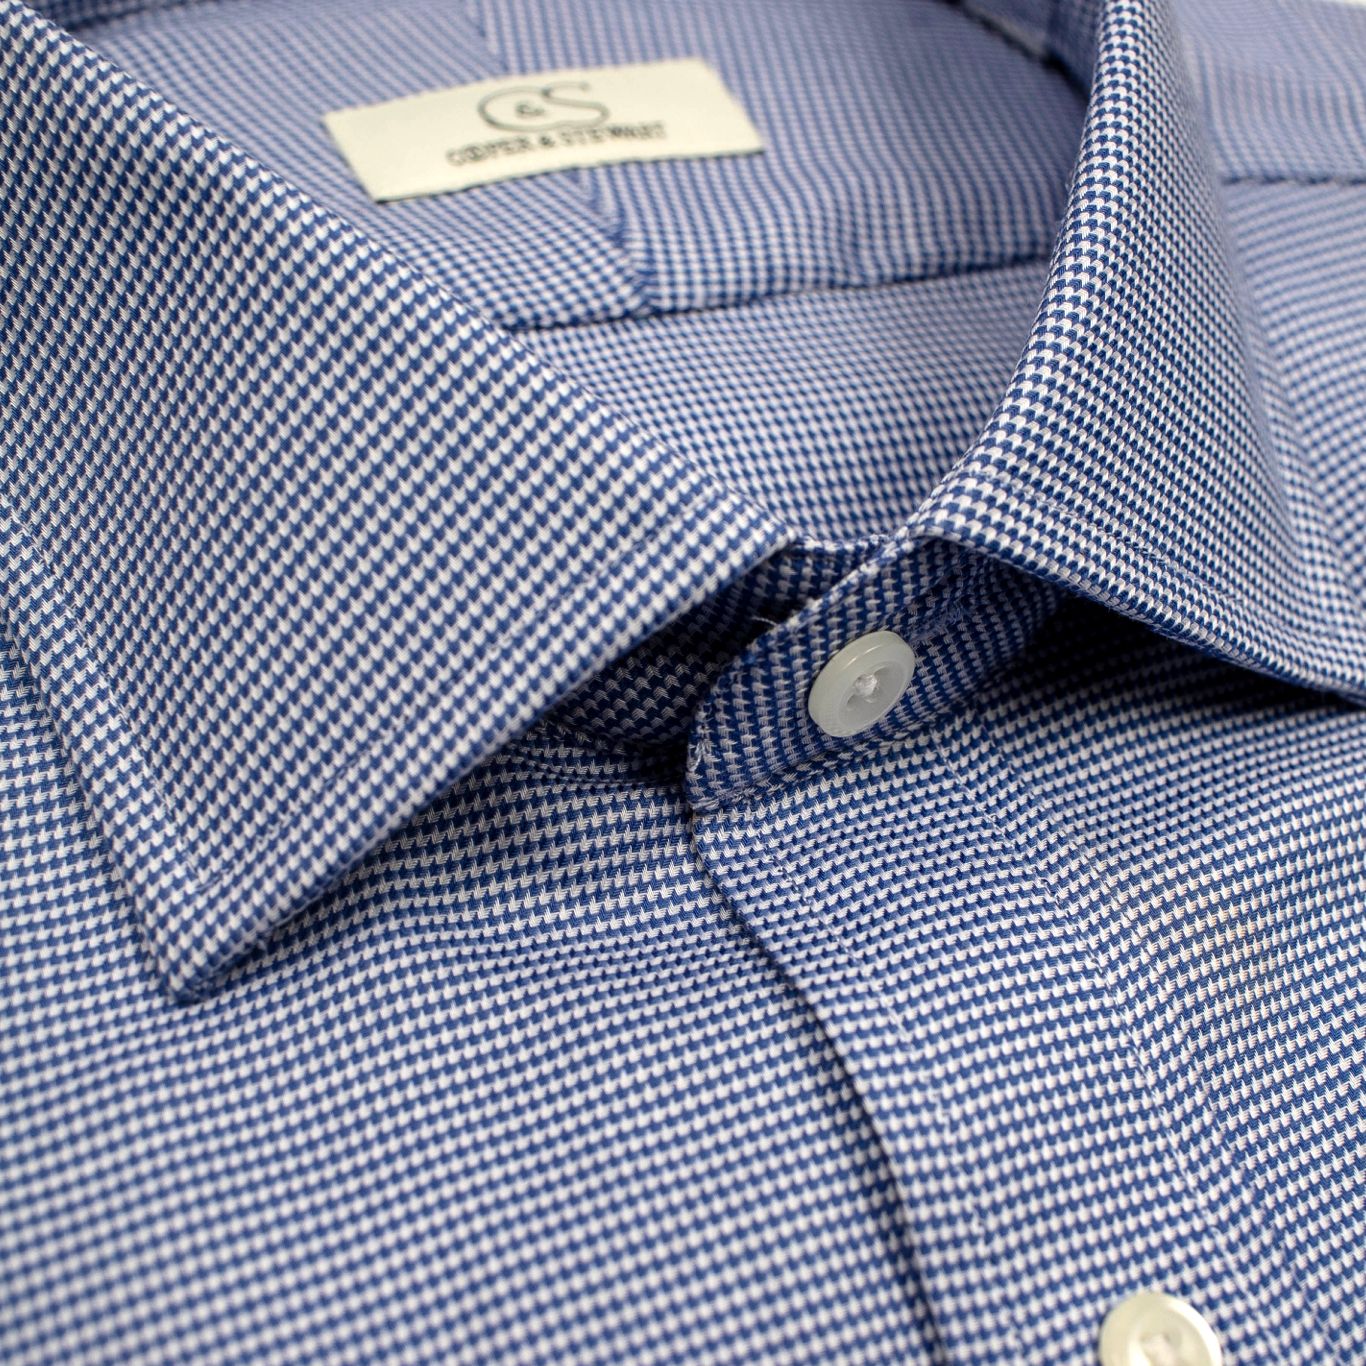 Blue and White Dobby Houndstooth Wrinkle-Free Cotton Dress Shirt with Spread Collar by Cooper & Stewart